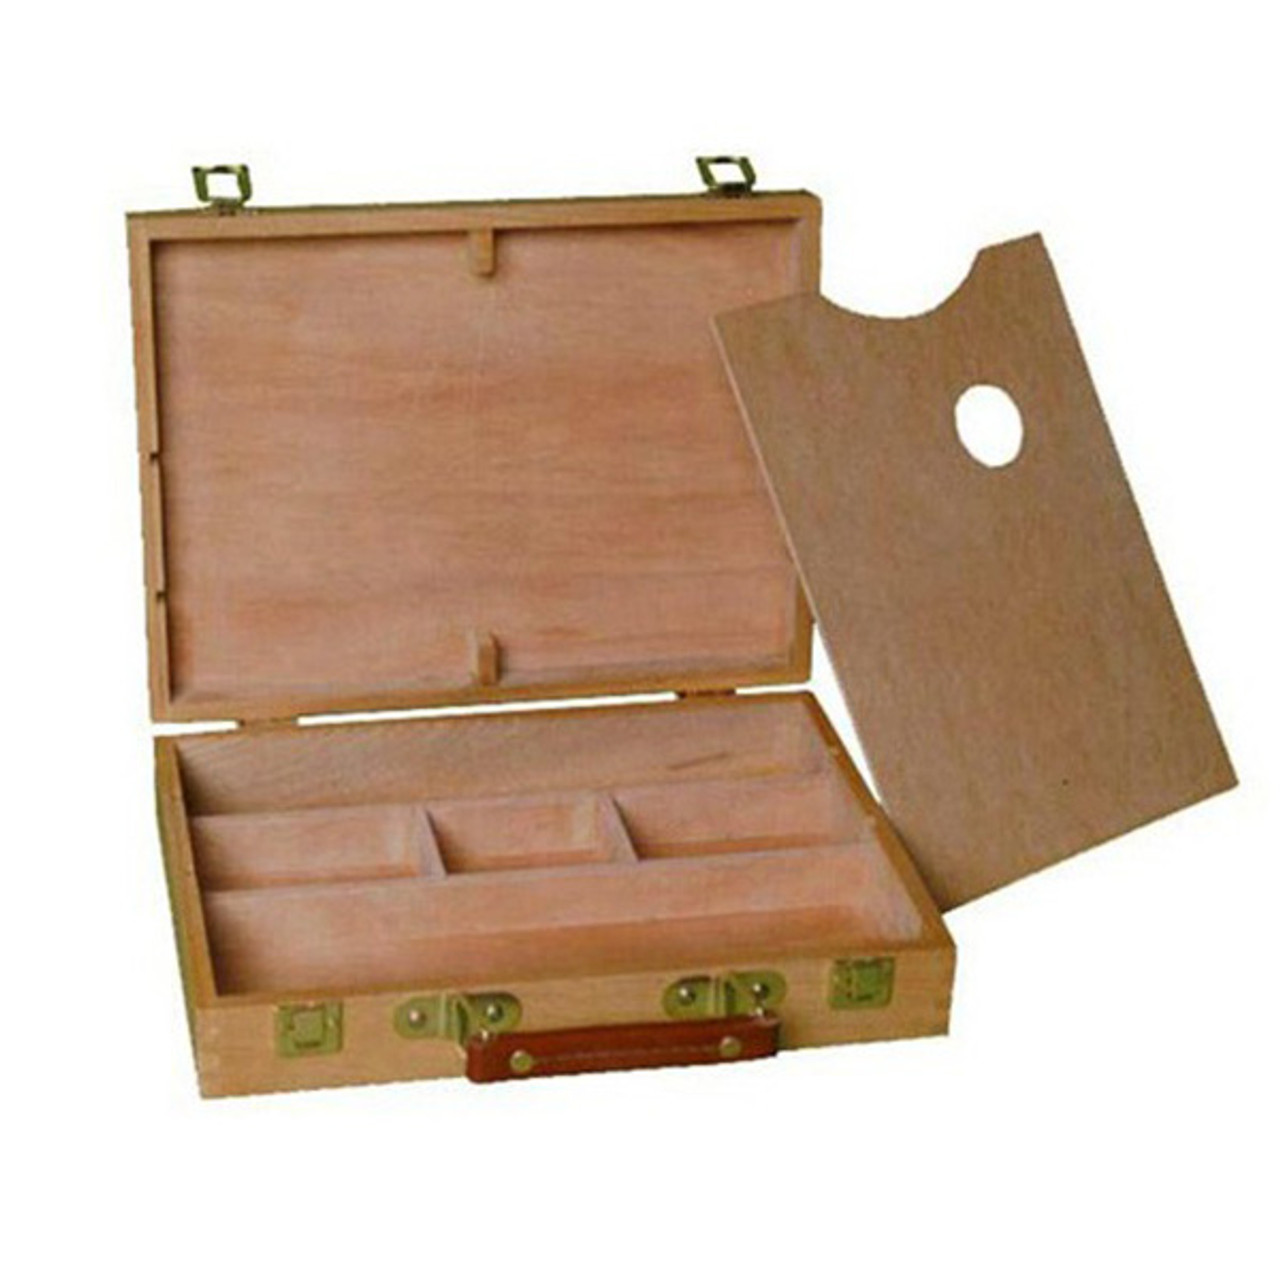 Wooden carry box briefcase style